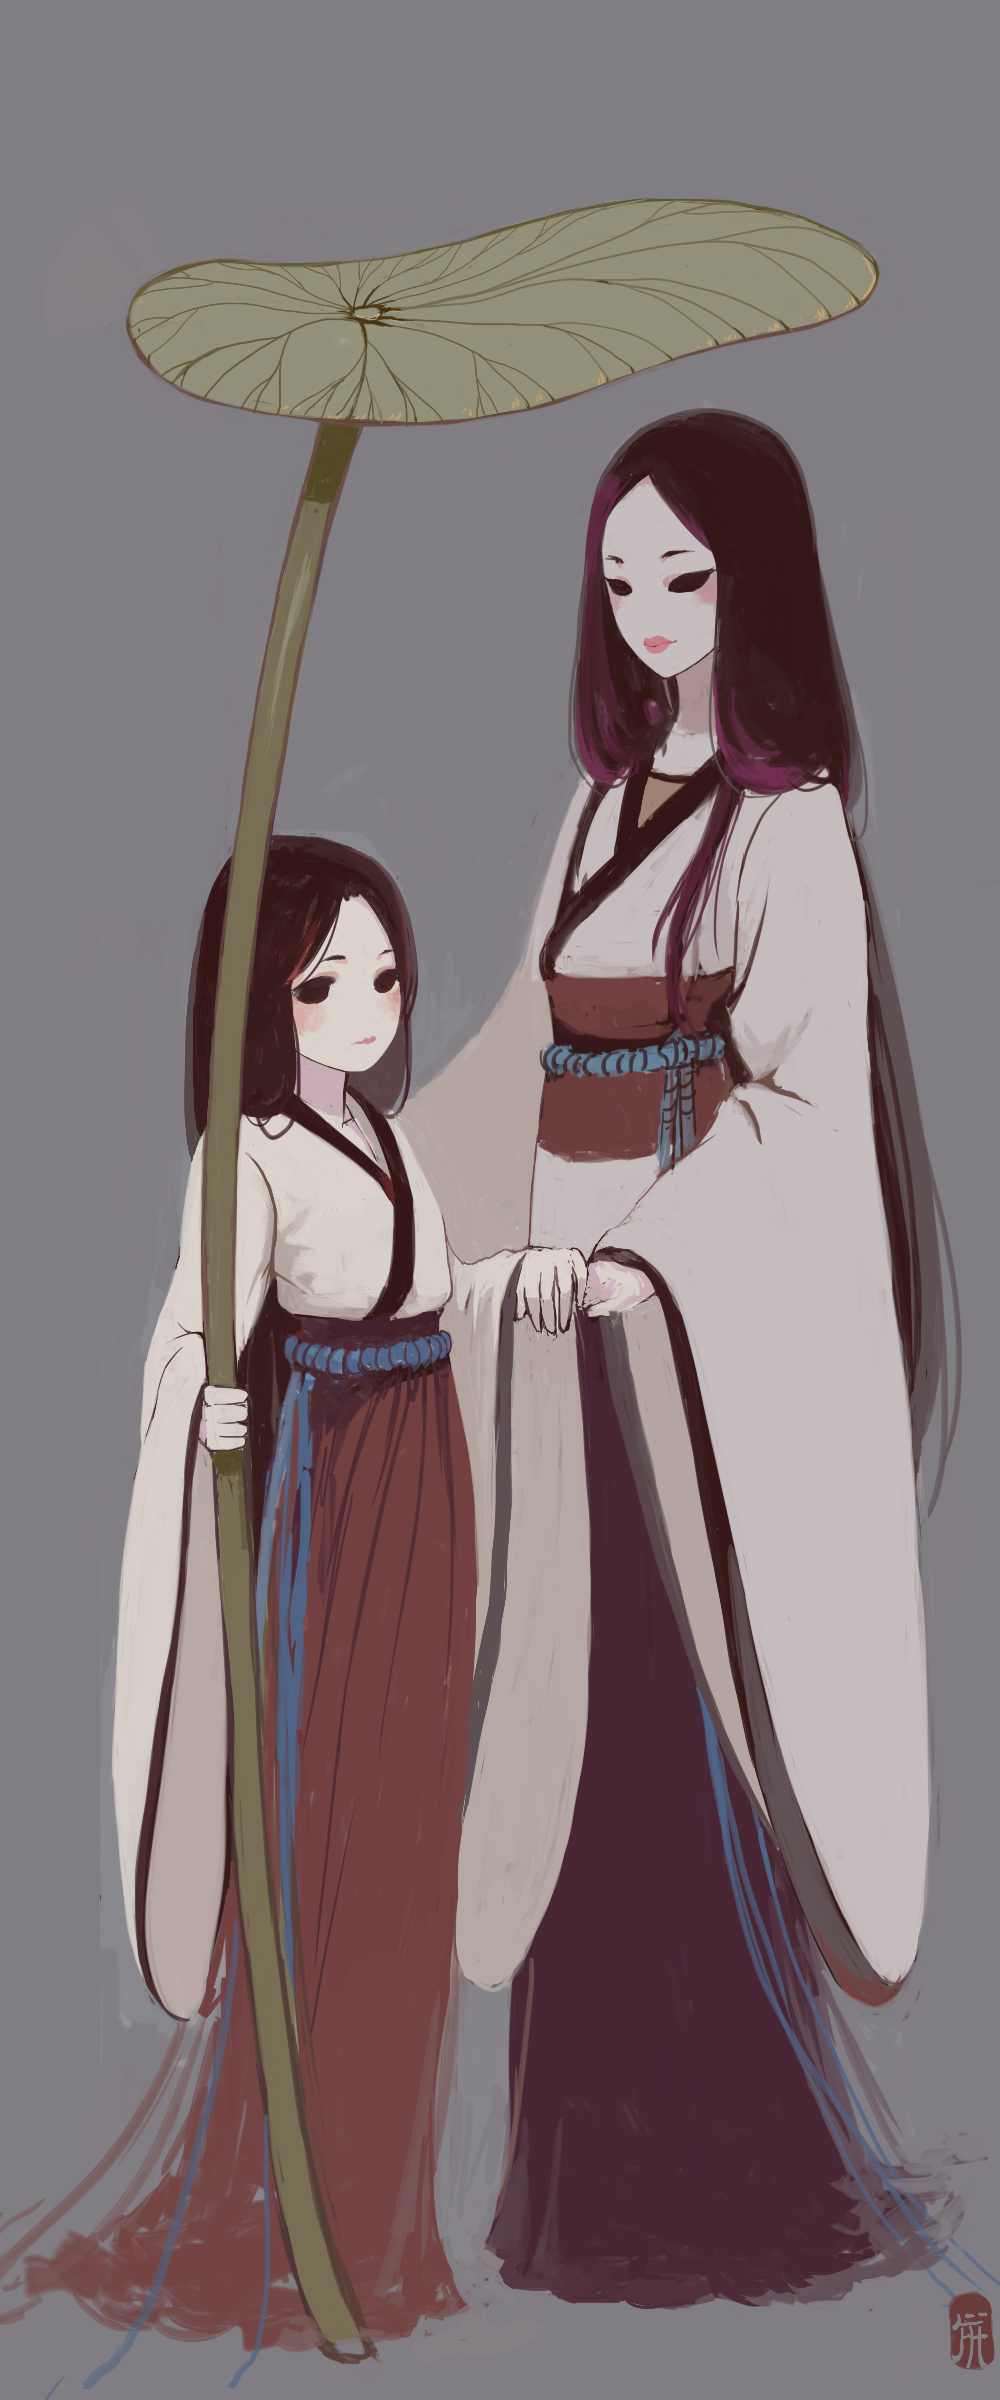 2girls absurdres age_difference asllence black_hair child hakama height_difference highres holding_hands japanese_clothes long_hair multiple_girls no_bangs obi original oversized_object sash very_long_hair wide_sleeves